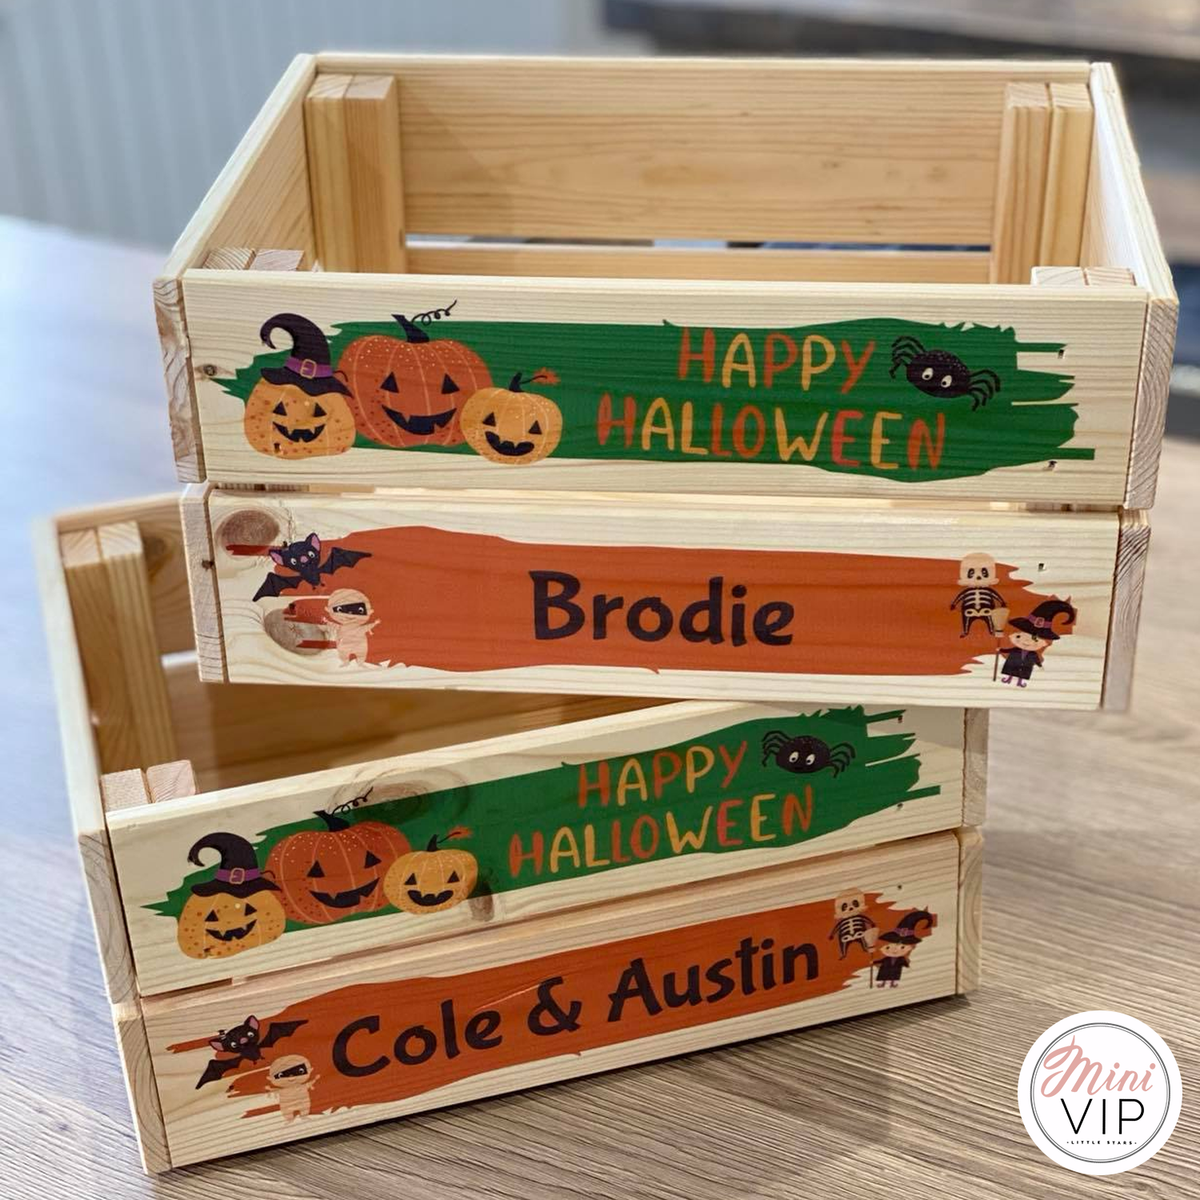 Personalised Halloween Wooden Crate - perfect for Tricks &amp; Treats!